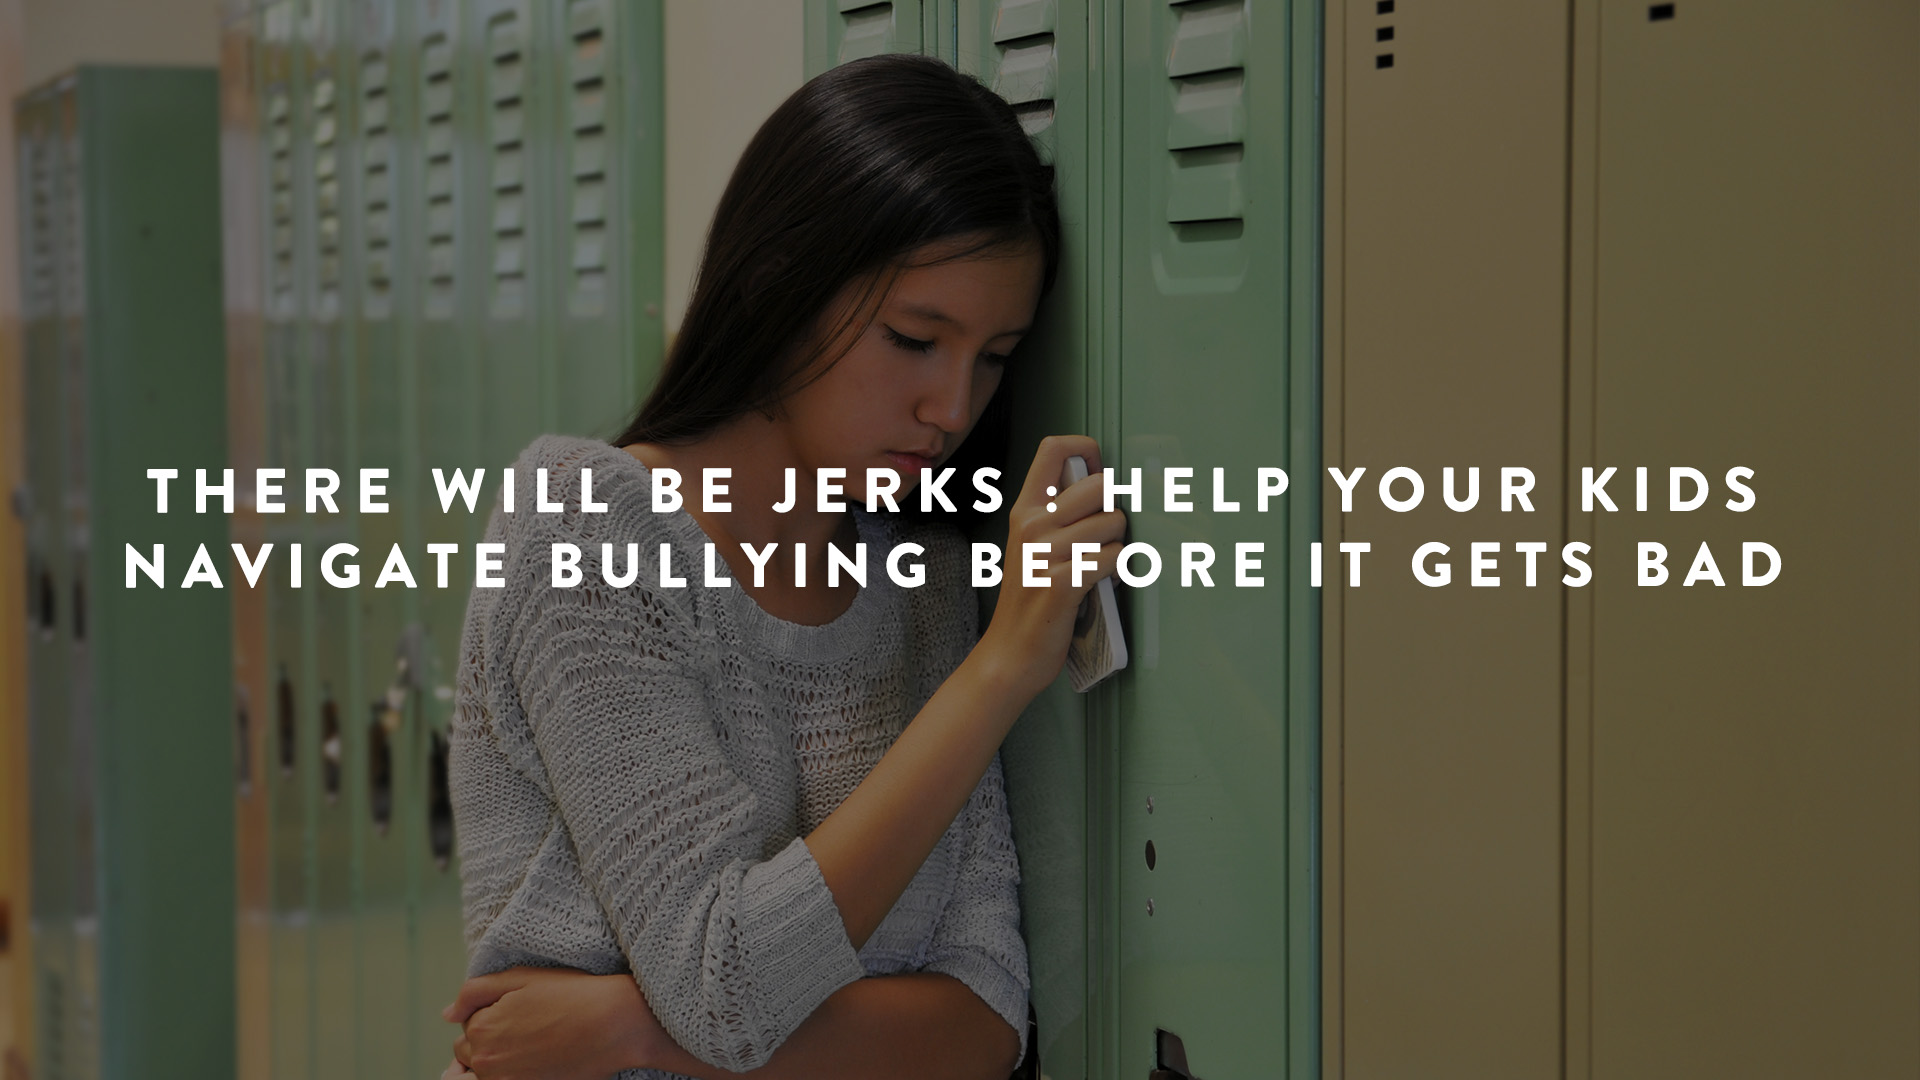 There Will Be jerks - how to help kids navigate bullying before it gets bad